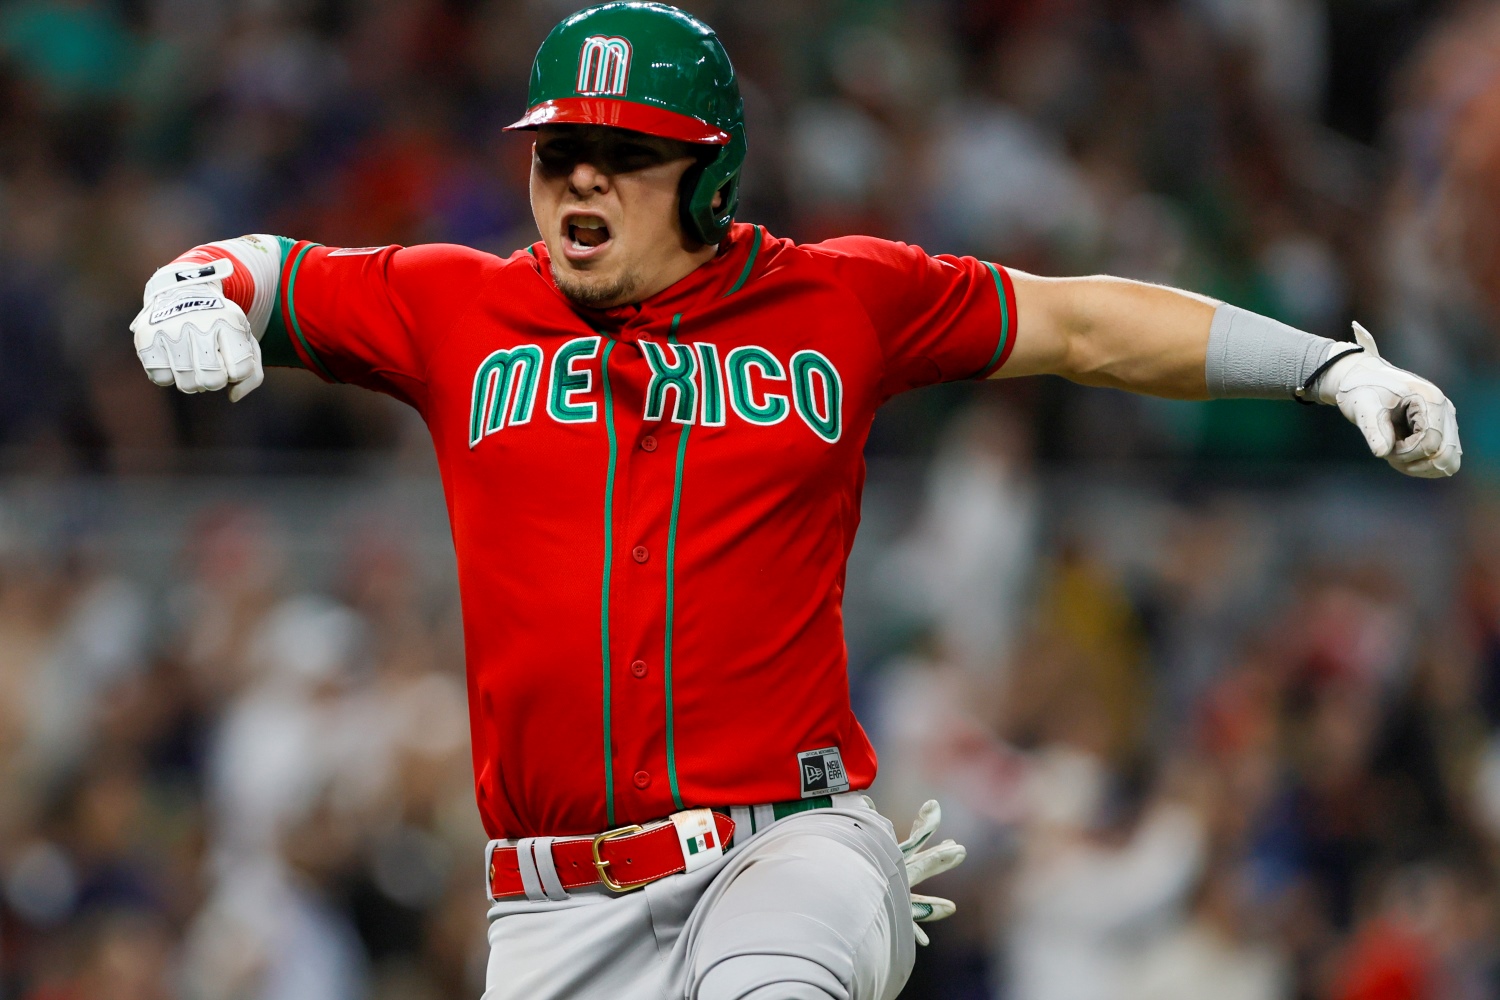 Isaac Paredes, Luis Urias lead Mexico to World Baseball Classic